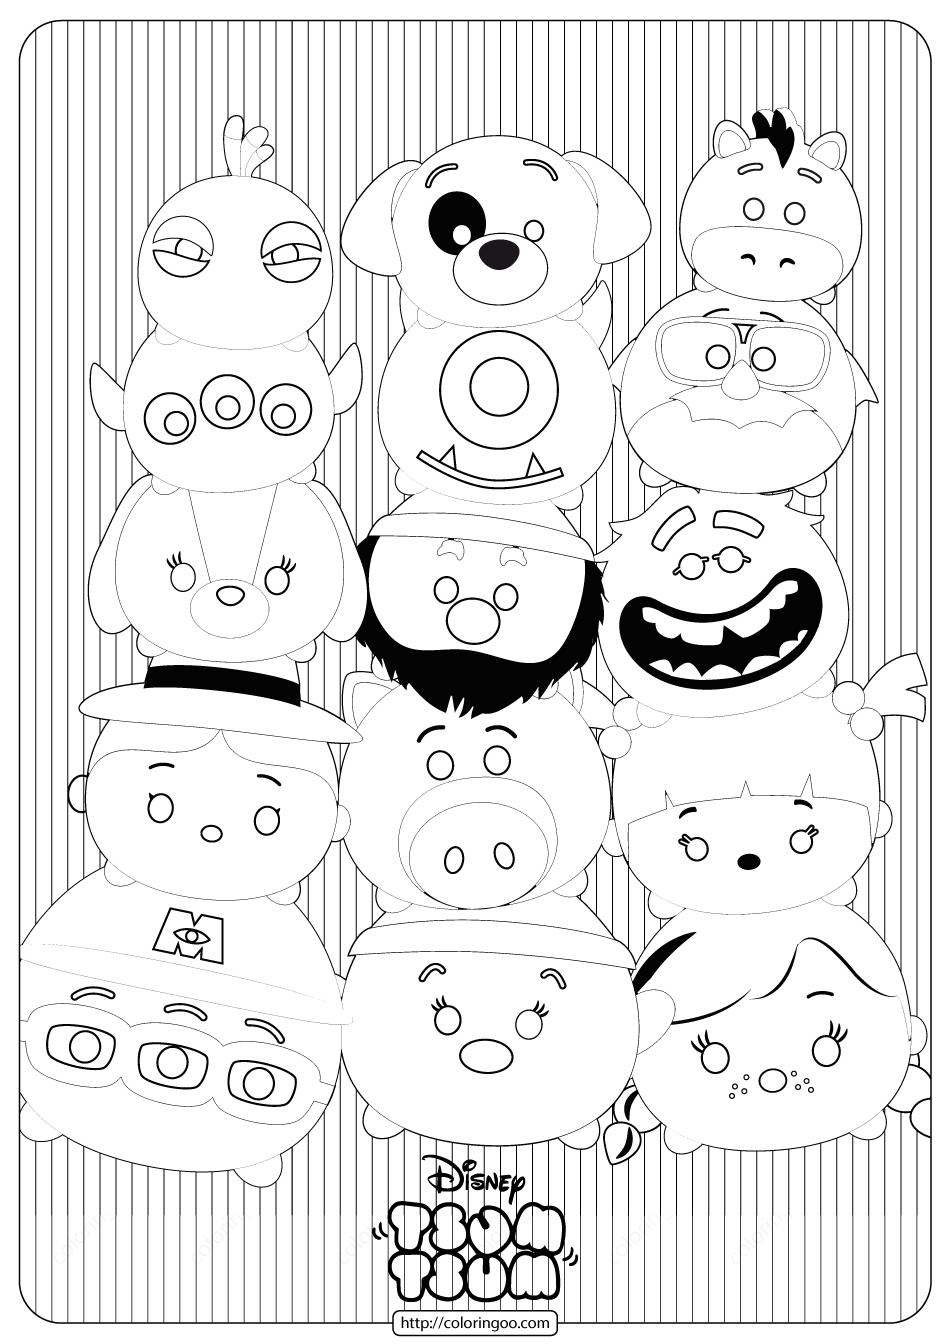 disney tsum tsum stack coloring pages